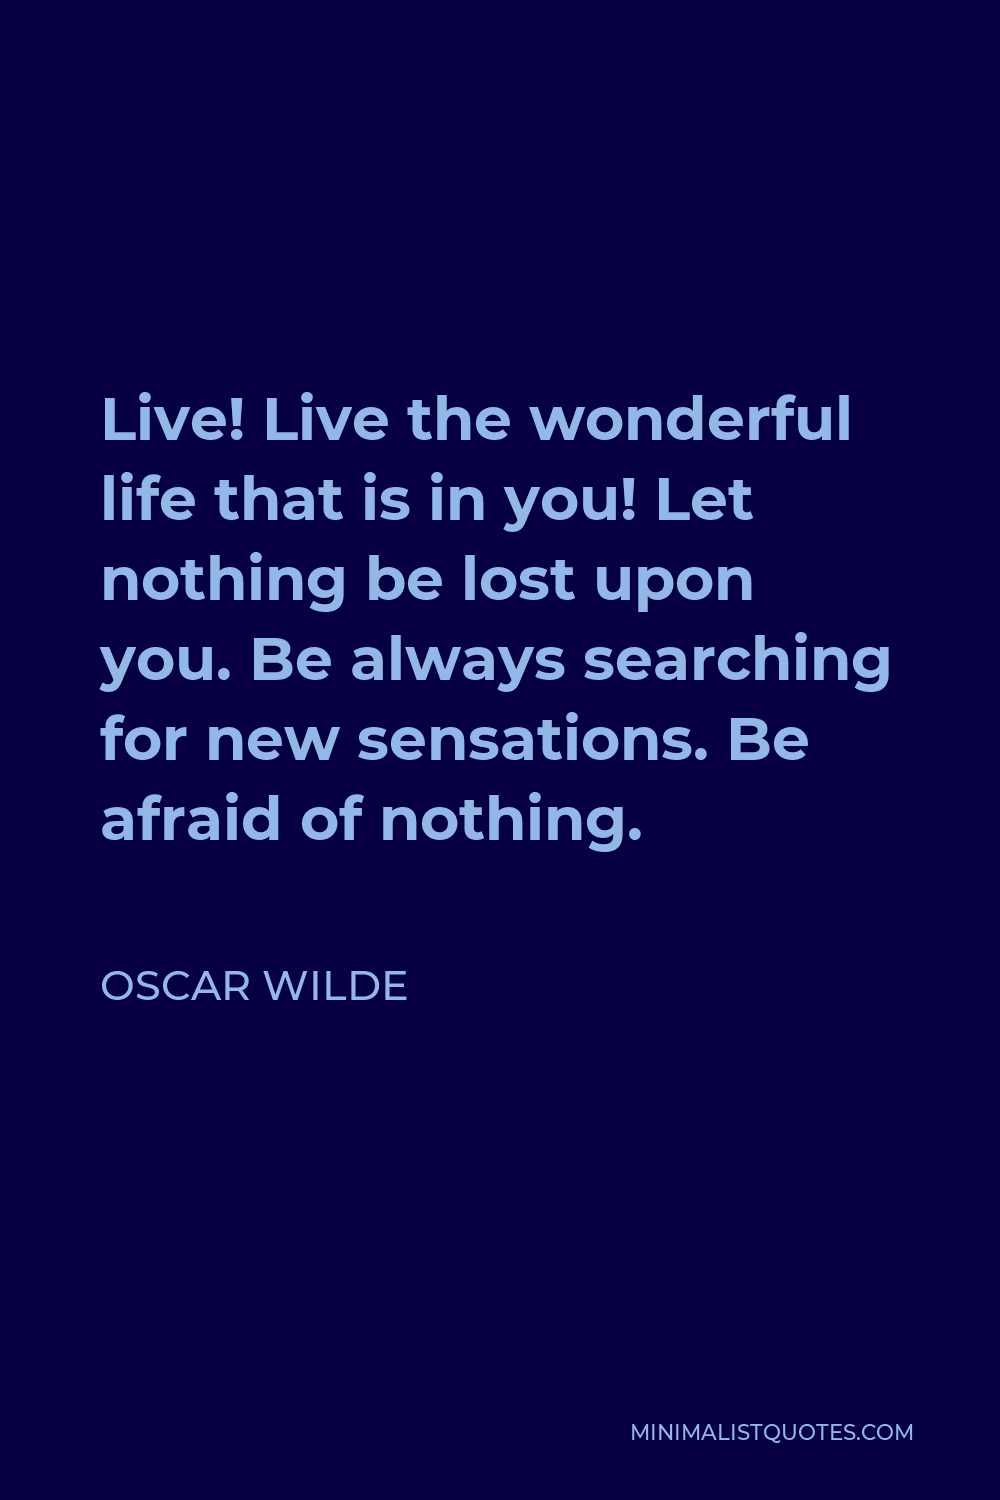 Oscar Wilde Quote - Live! Live the wonderful life that is in you! Let nothing be lost upon you. Be always searching for new sensations. Be afraid of nothing.